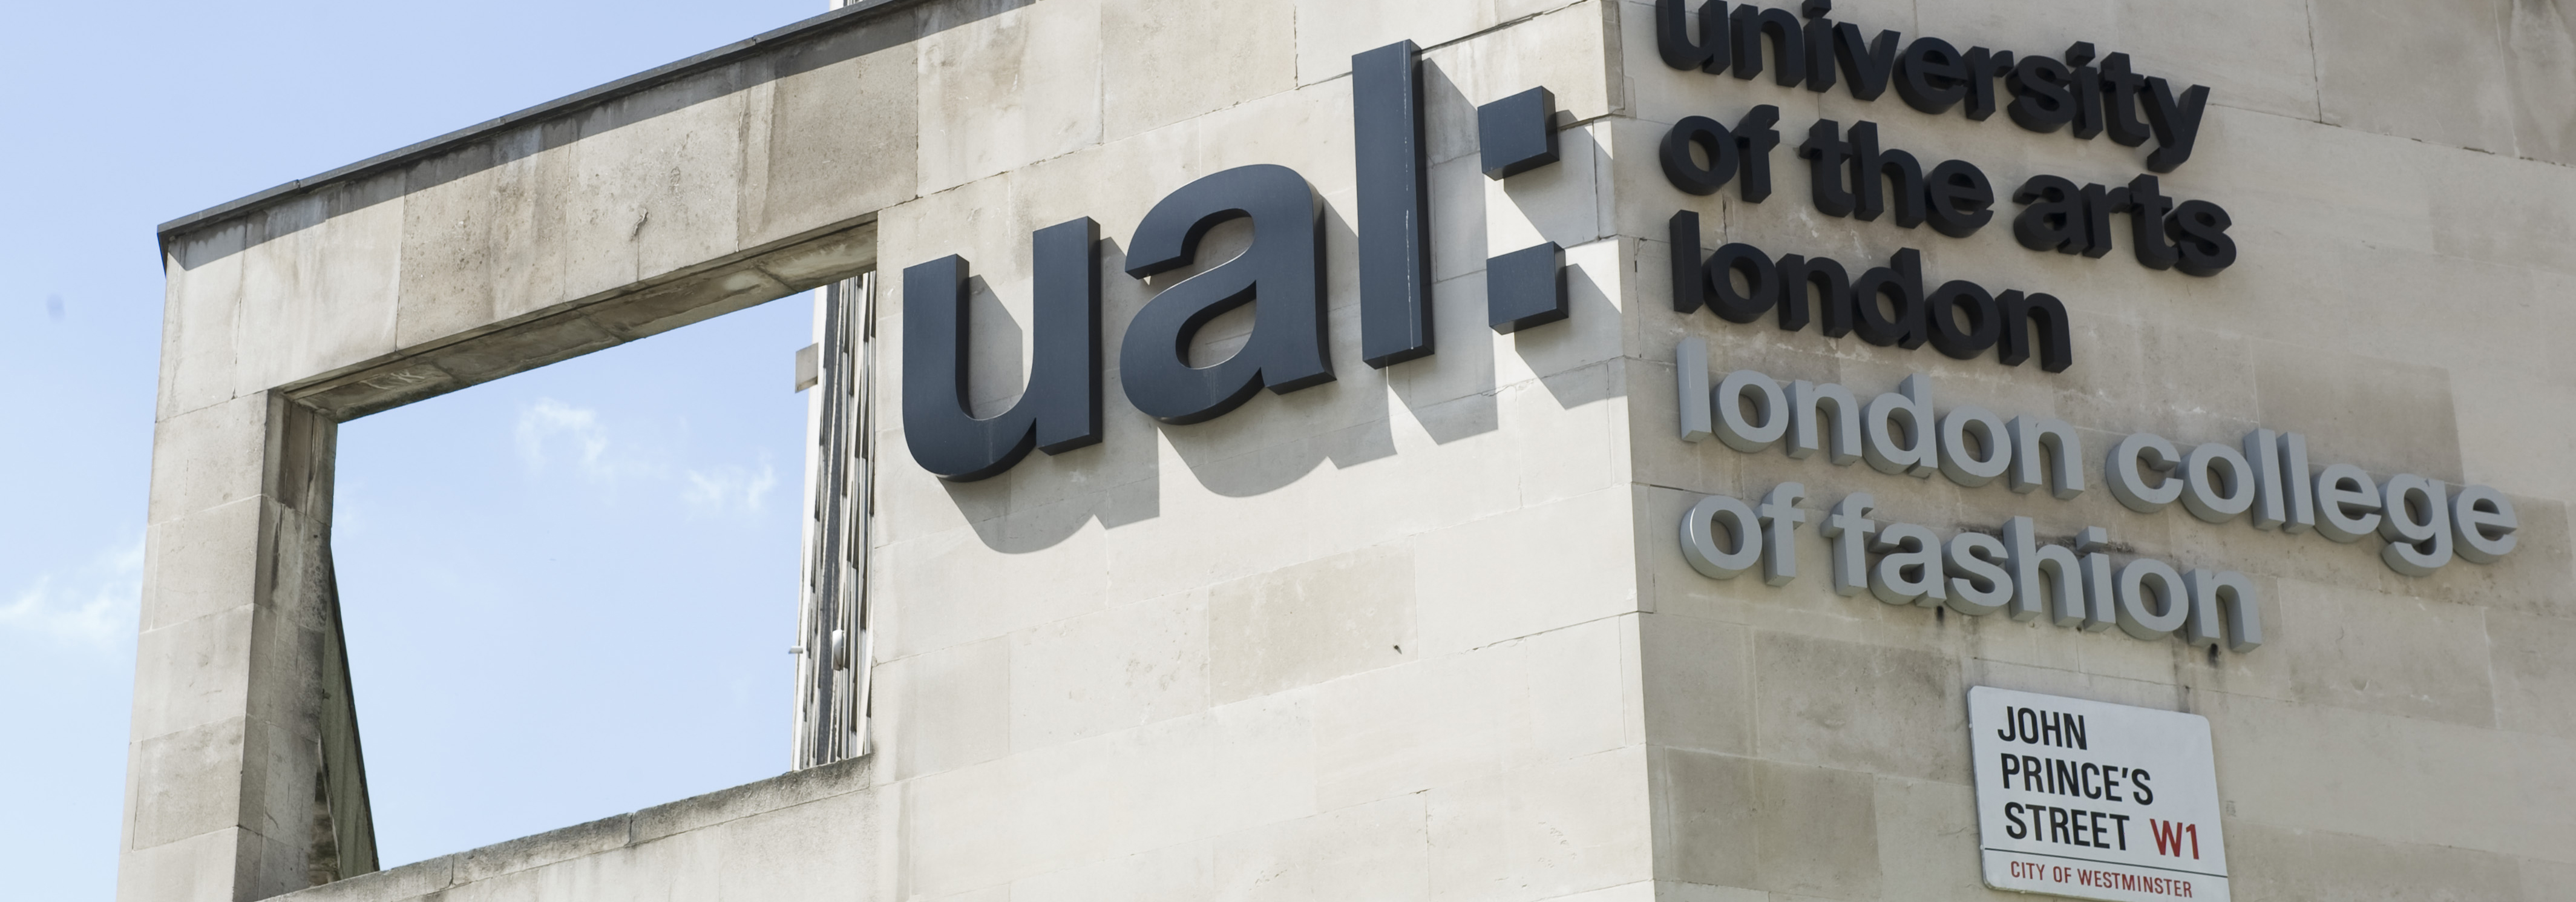 Side of building with big letters logo of UAL and London College of Fashion